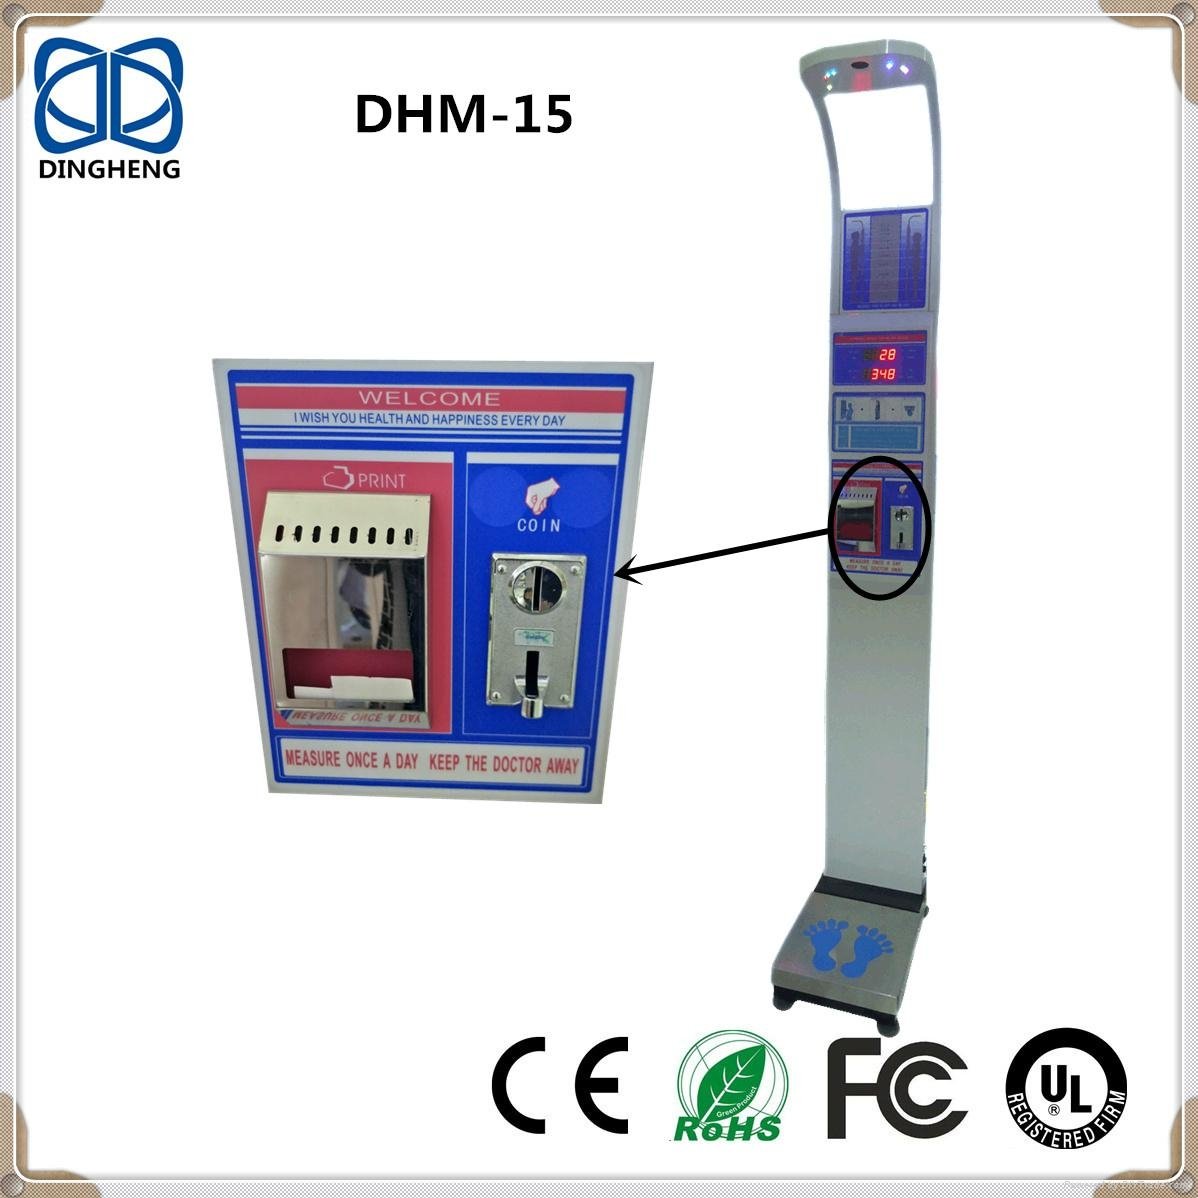 DHM-15 Height Measure Electronic Body Weight Scale Coin operated scales